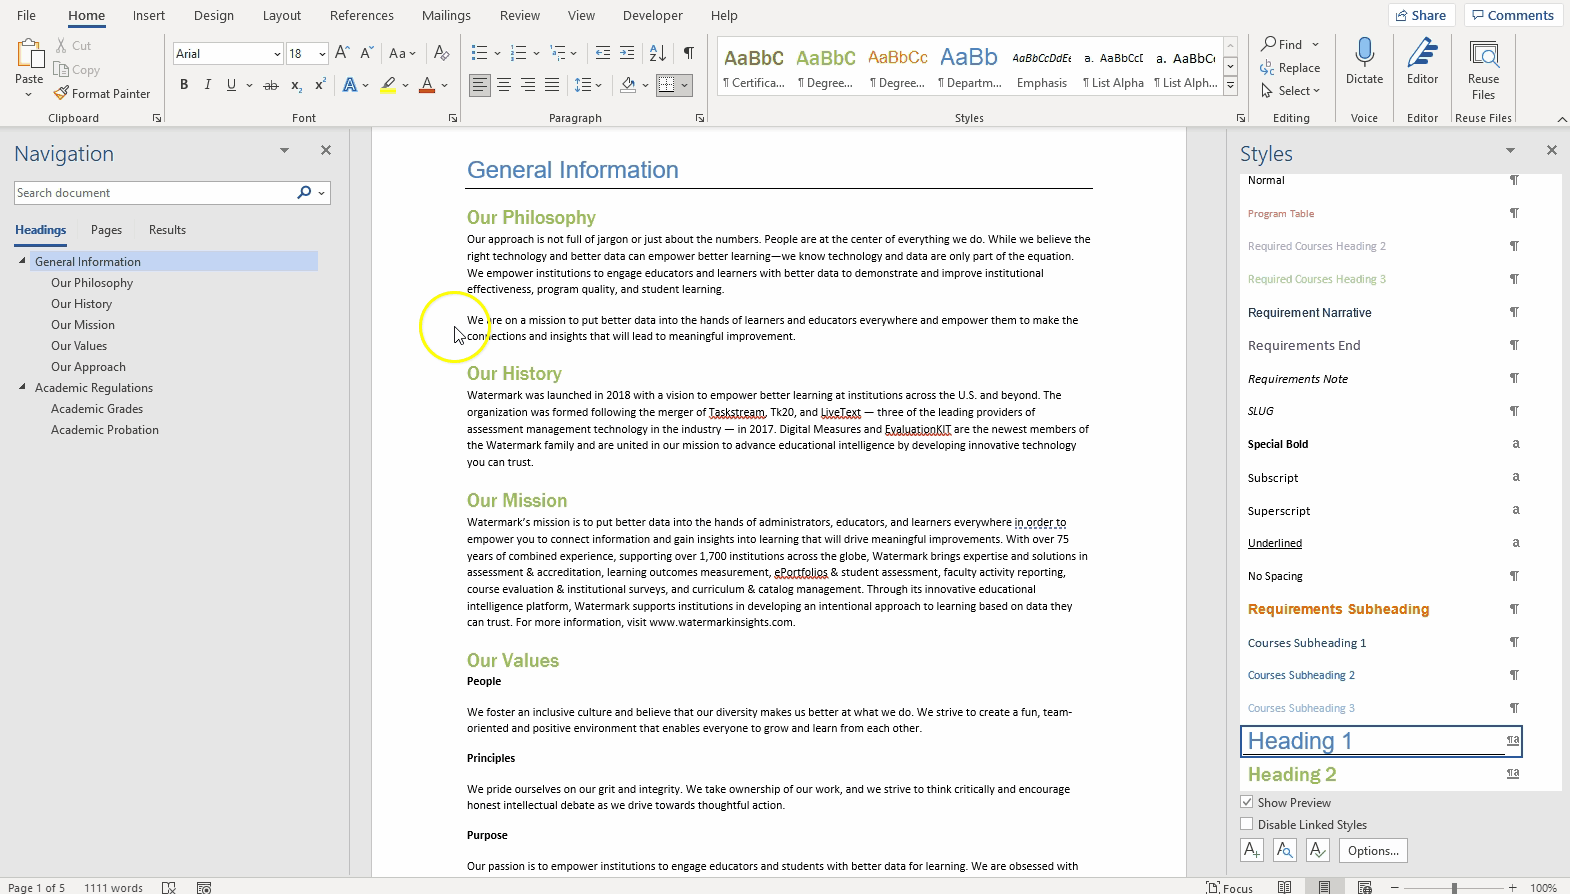 Using the navigation pane in Word to jump around to different sections